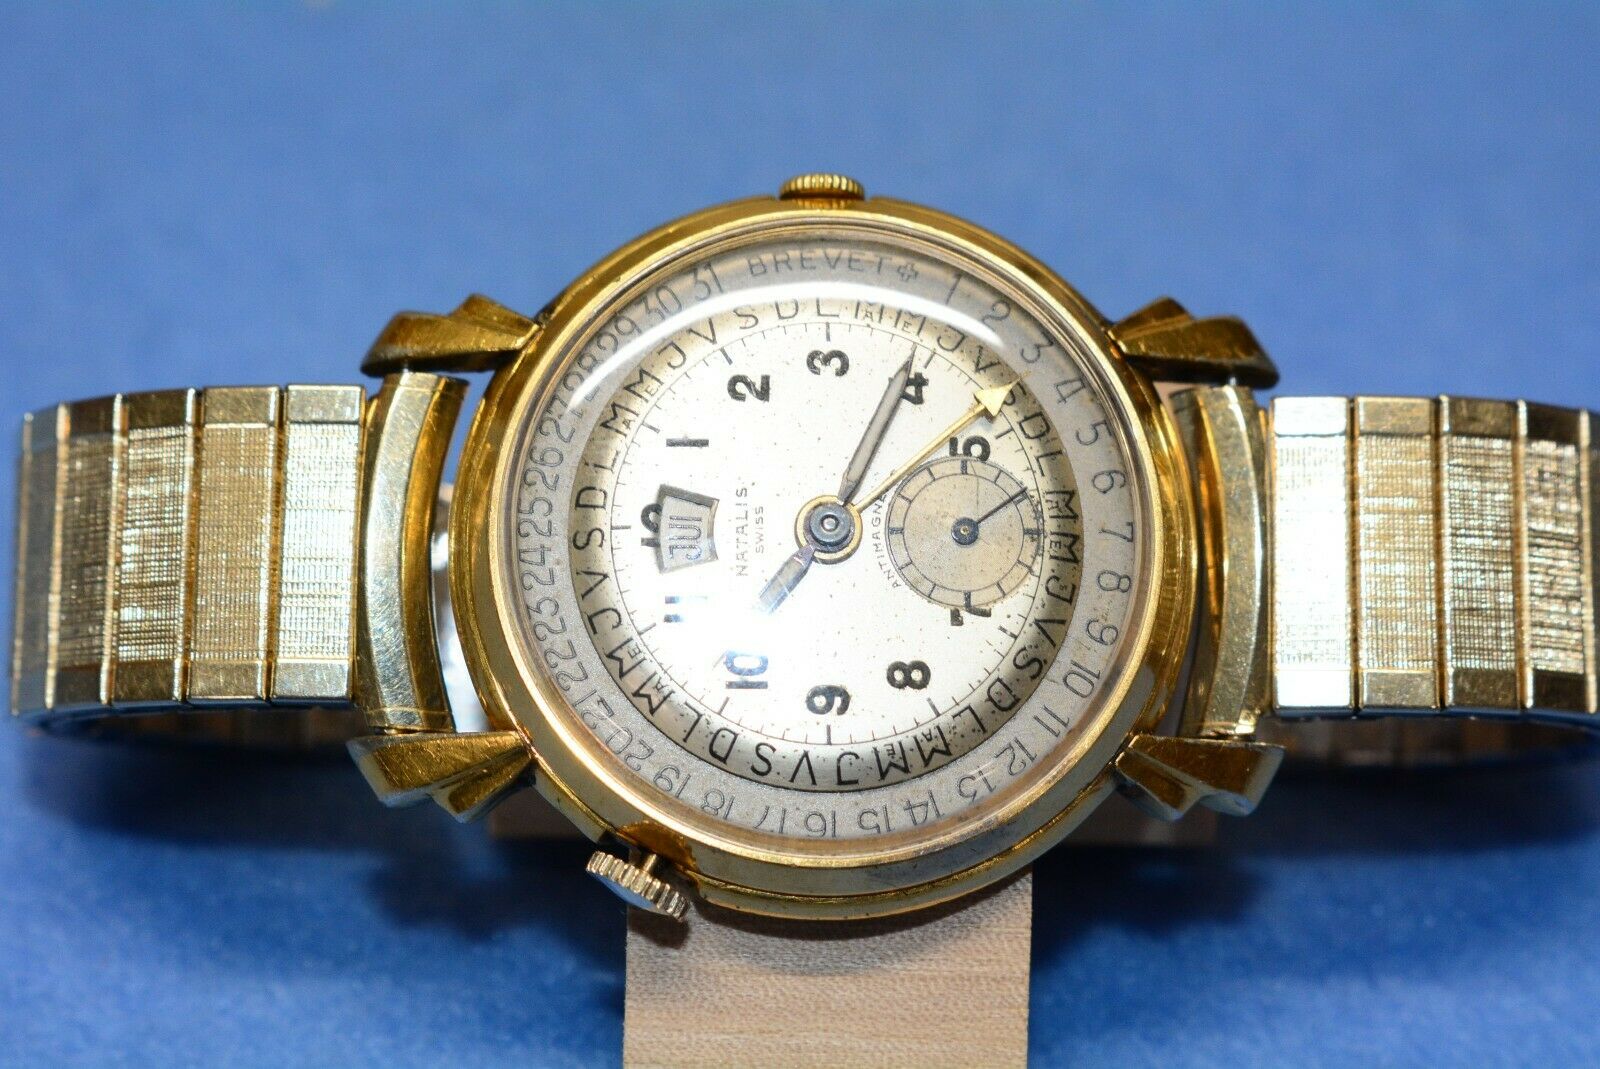 Aquastar GENÈVE REGATE Ref. 9851 Vintage Swiss automatic... for  Rp.50,384,085 for sale from a Trusted Seller on Chrono24